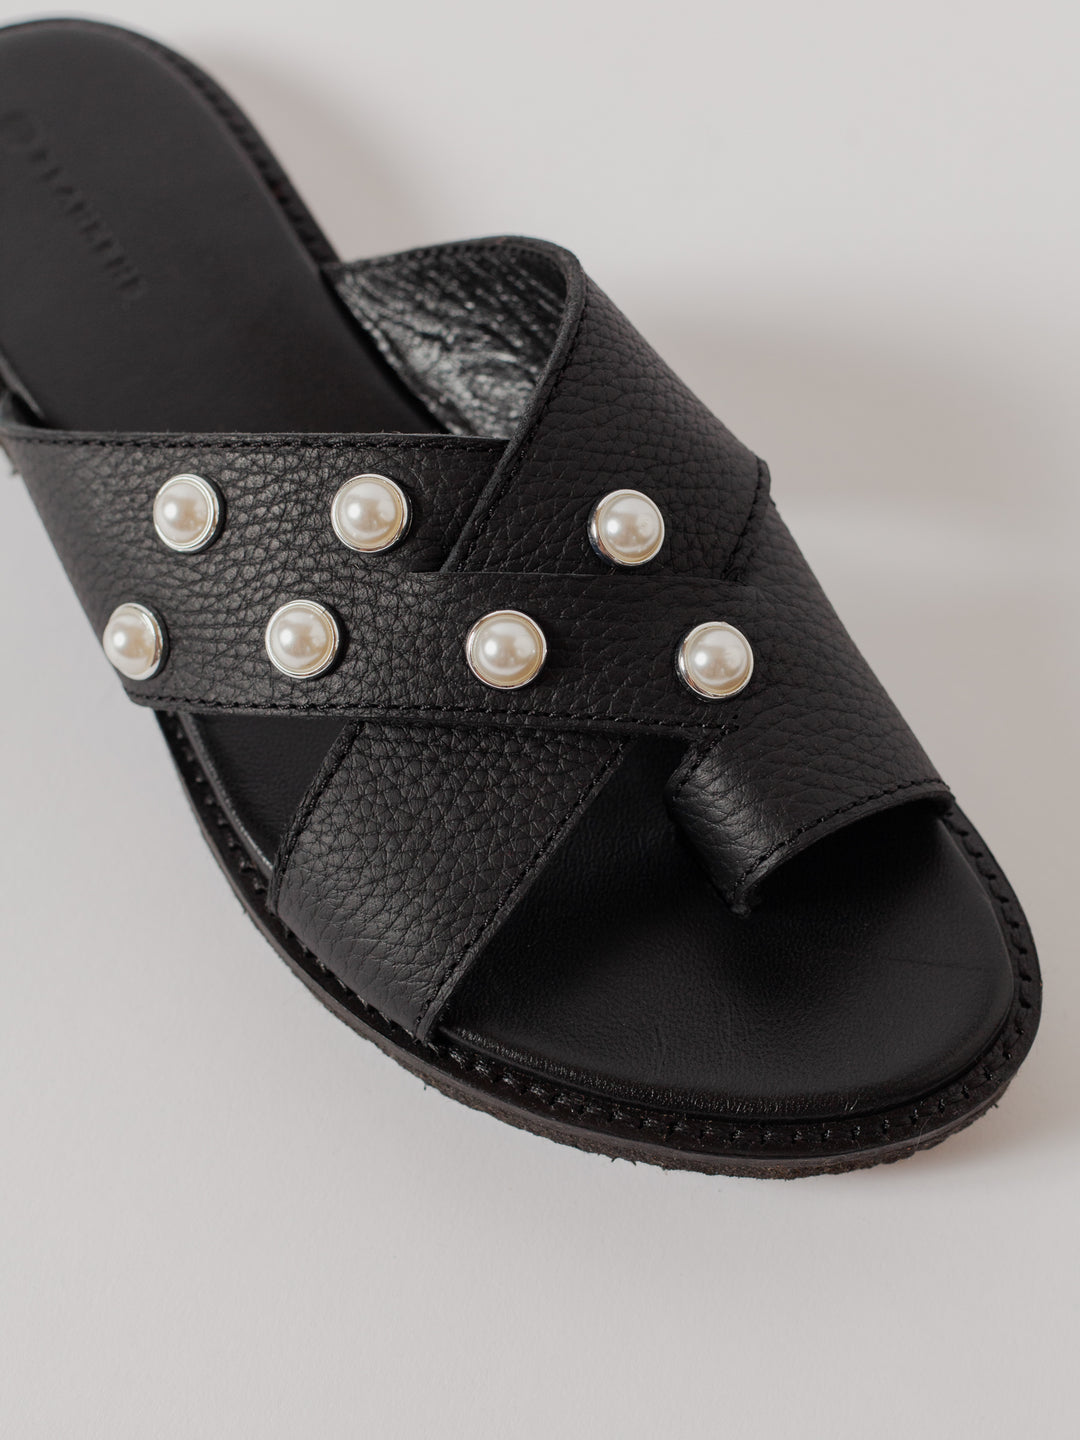 THE METTE BLACK ECO LEATHER WITH PEARLS